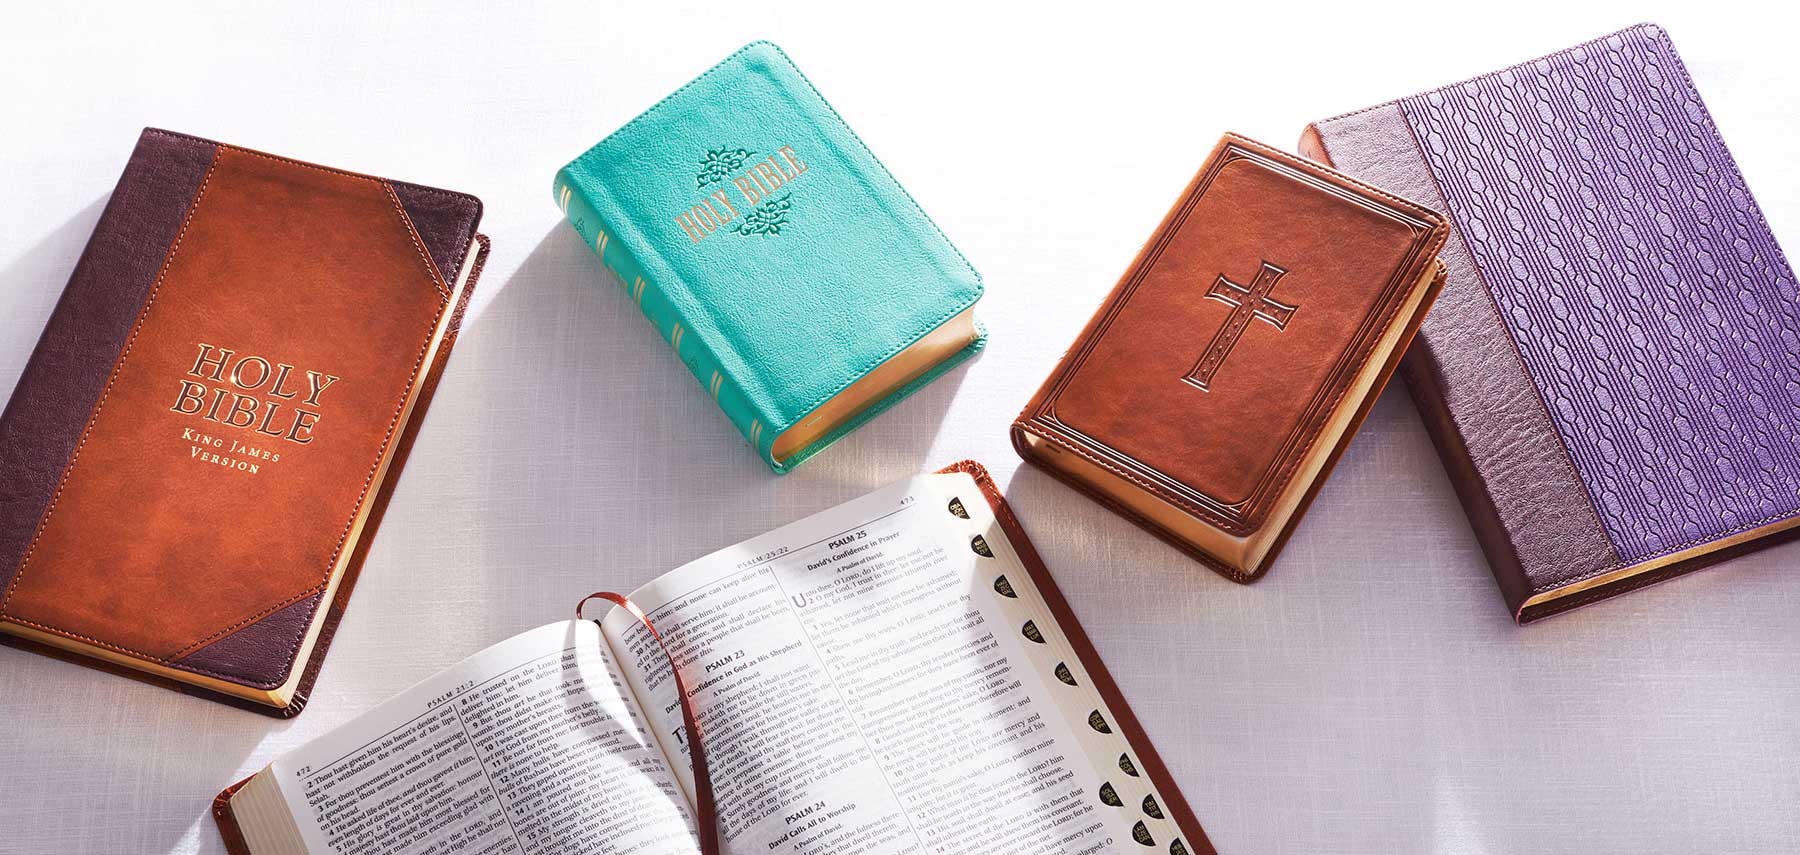 Brown, teal, purple bibles with open Bible and ribbon market and compact brown Bible with a debossed cross